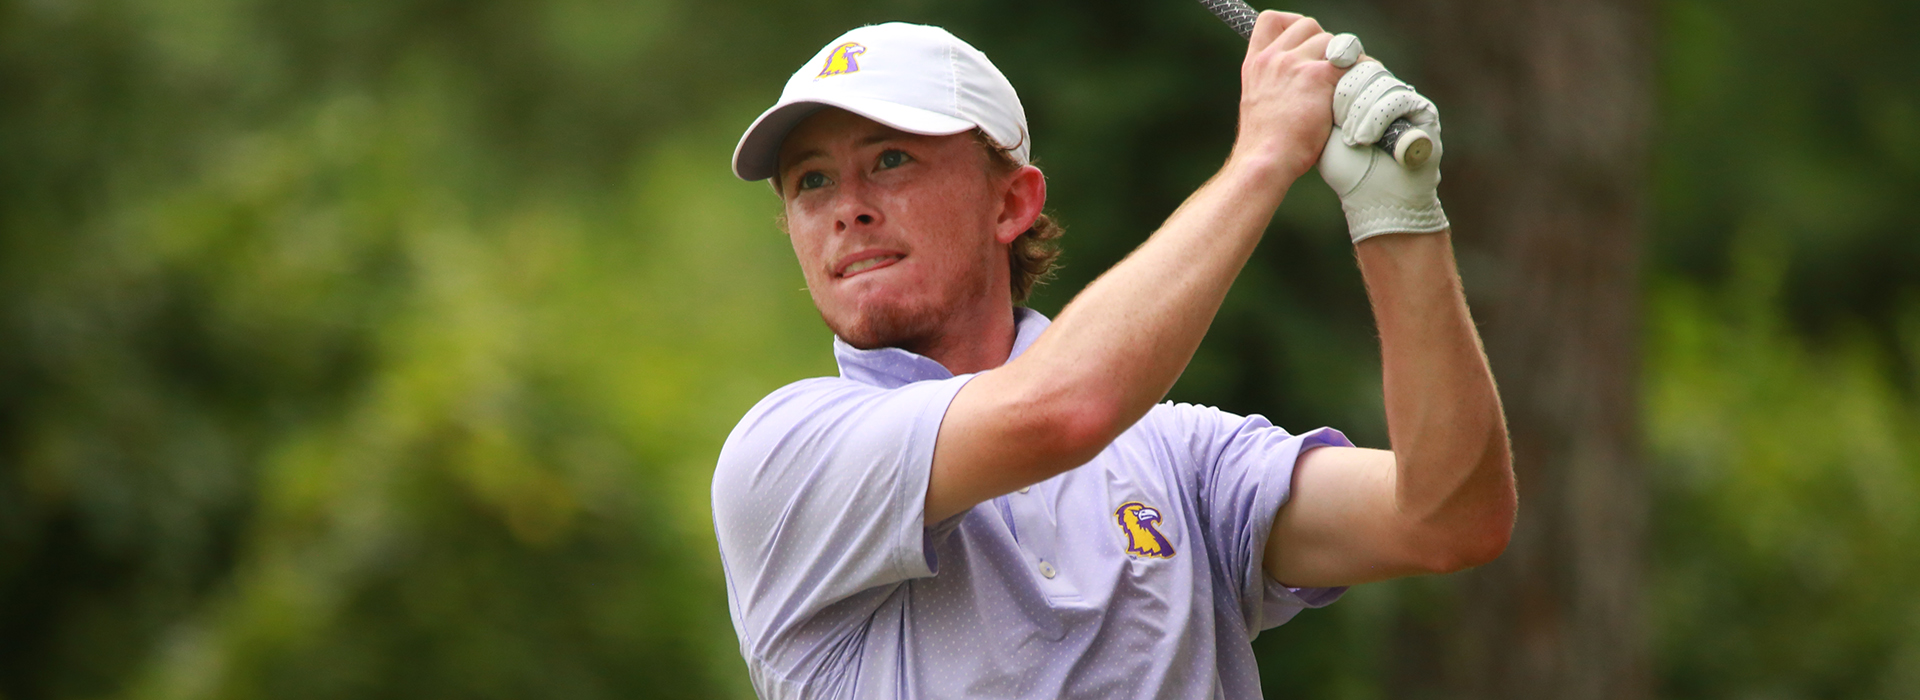 Golden Eagles tied for third after first round of Bobby Nichols Intercollegiate